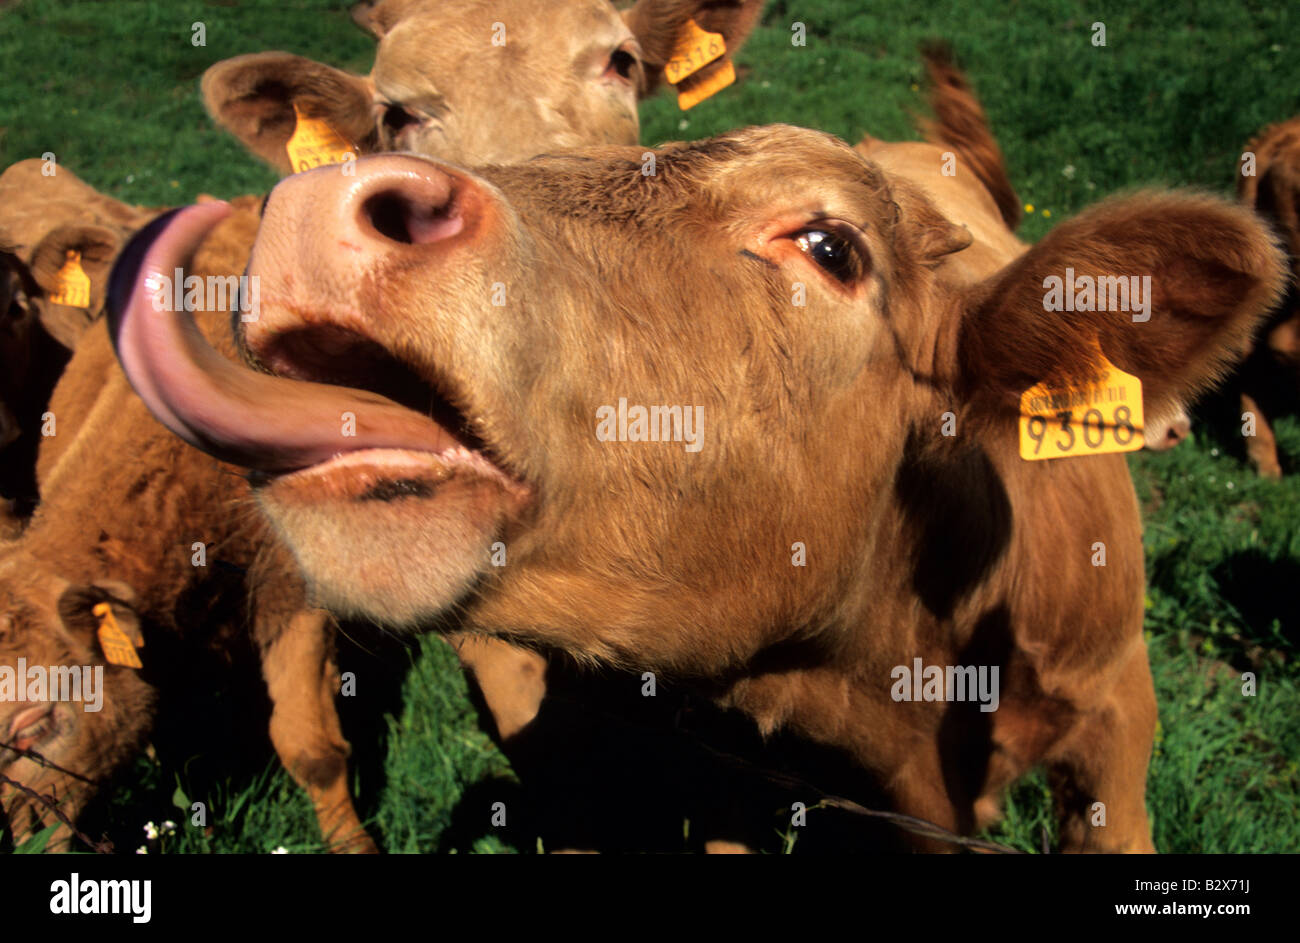 cow sticking out its tongue Stock Photo